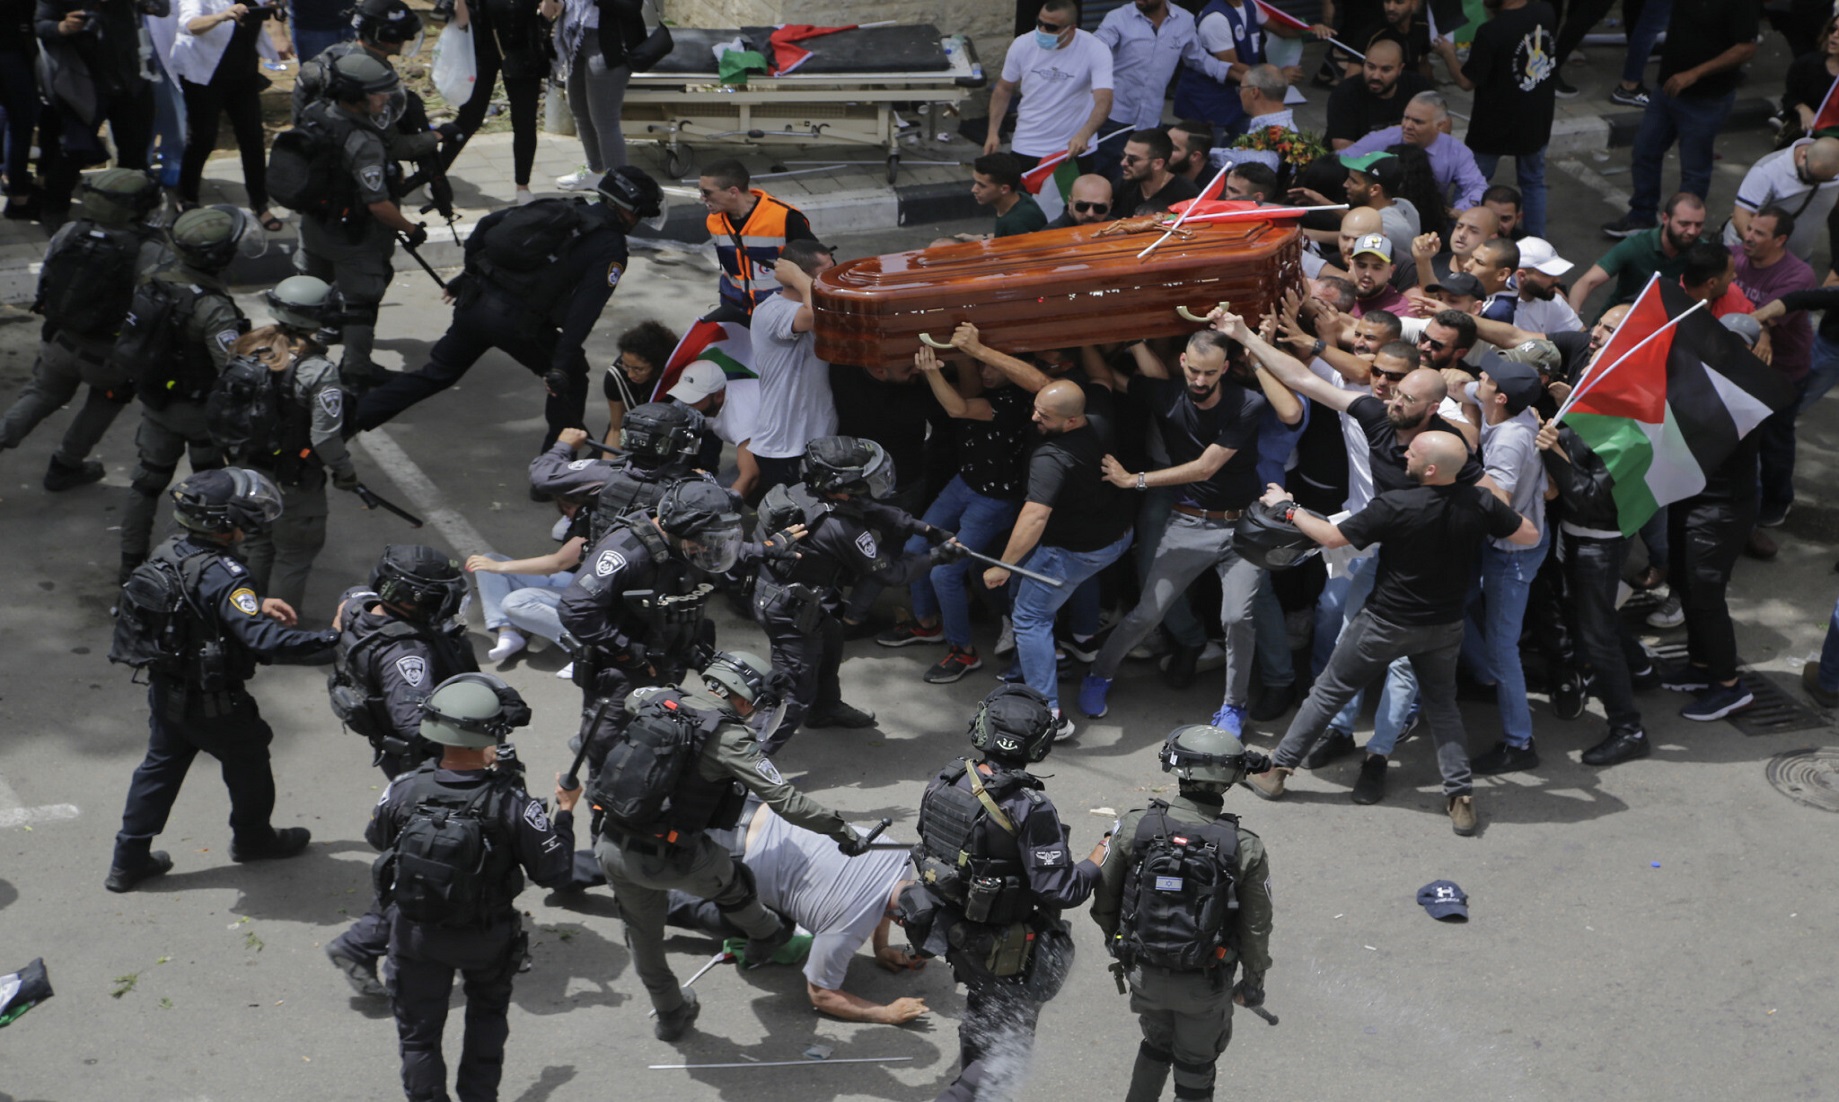 Clashes Erupt Between Palestinians, Israeli Police During Funeral In Jerusalem